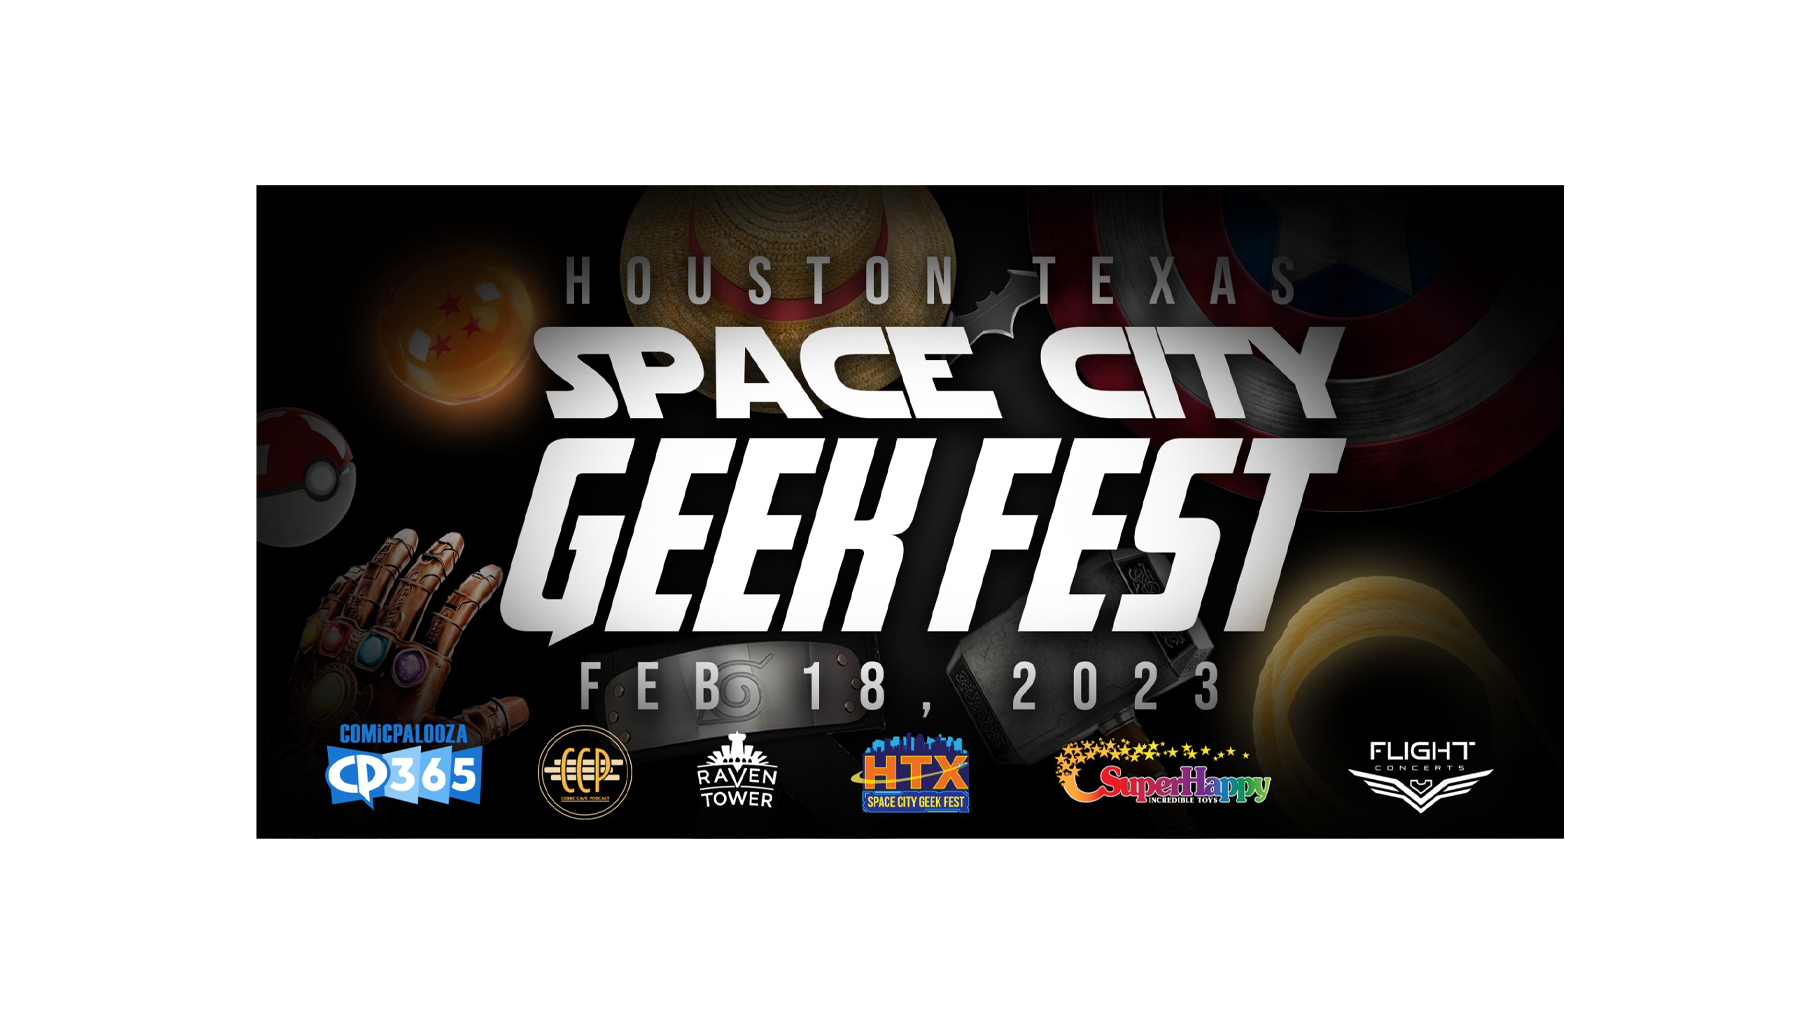 CP365 Event, Space City Geek Fest, February 18th